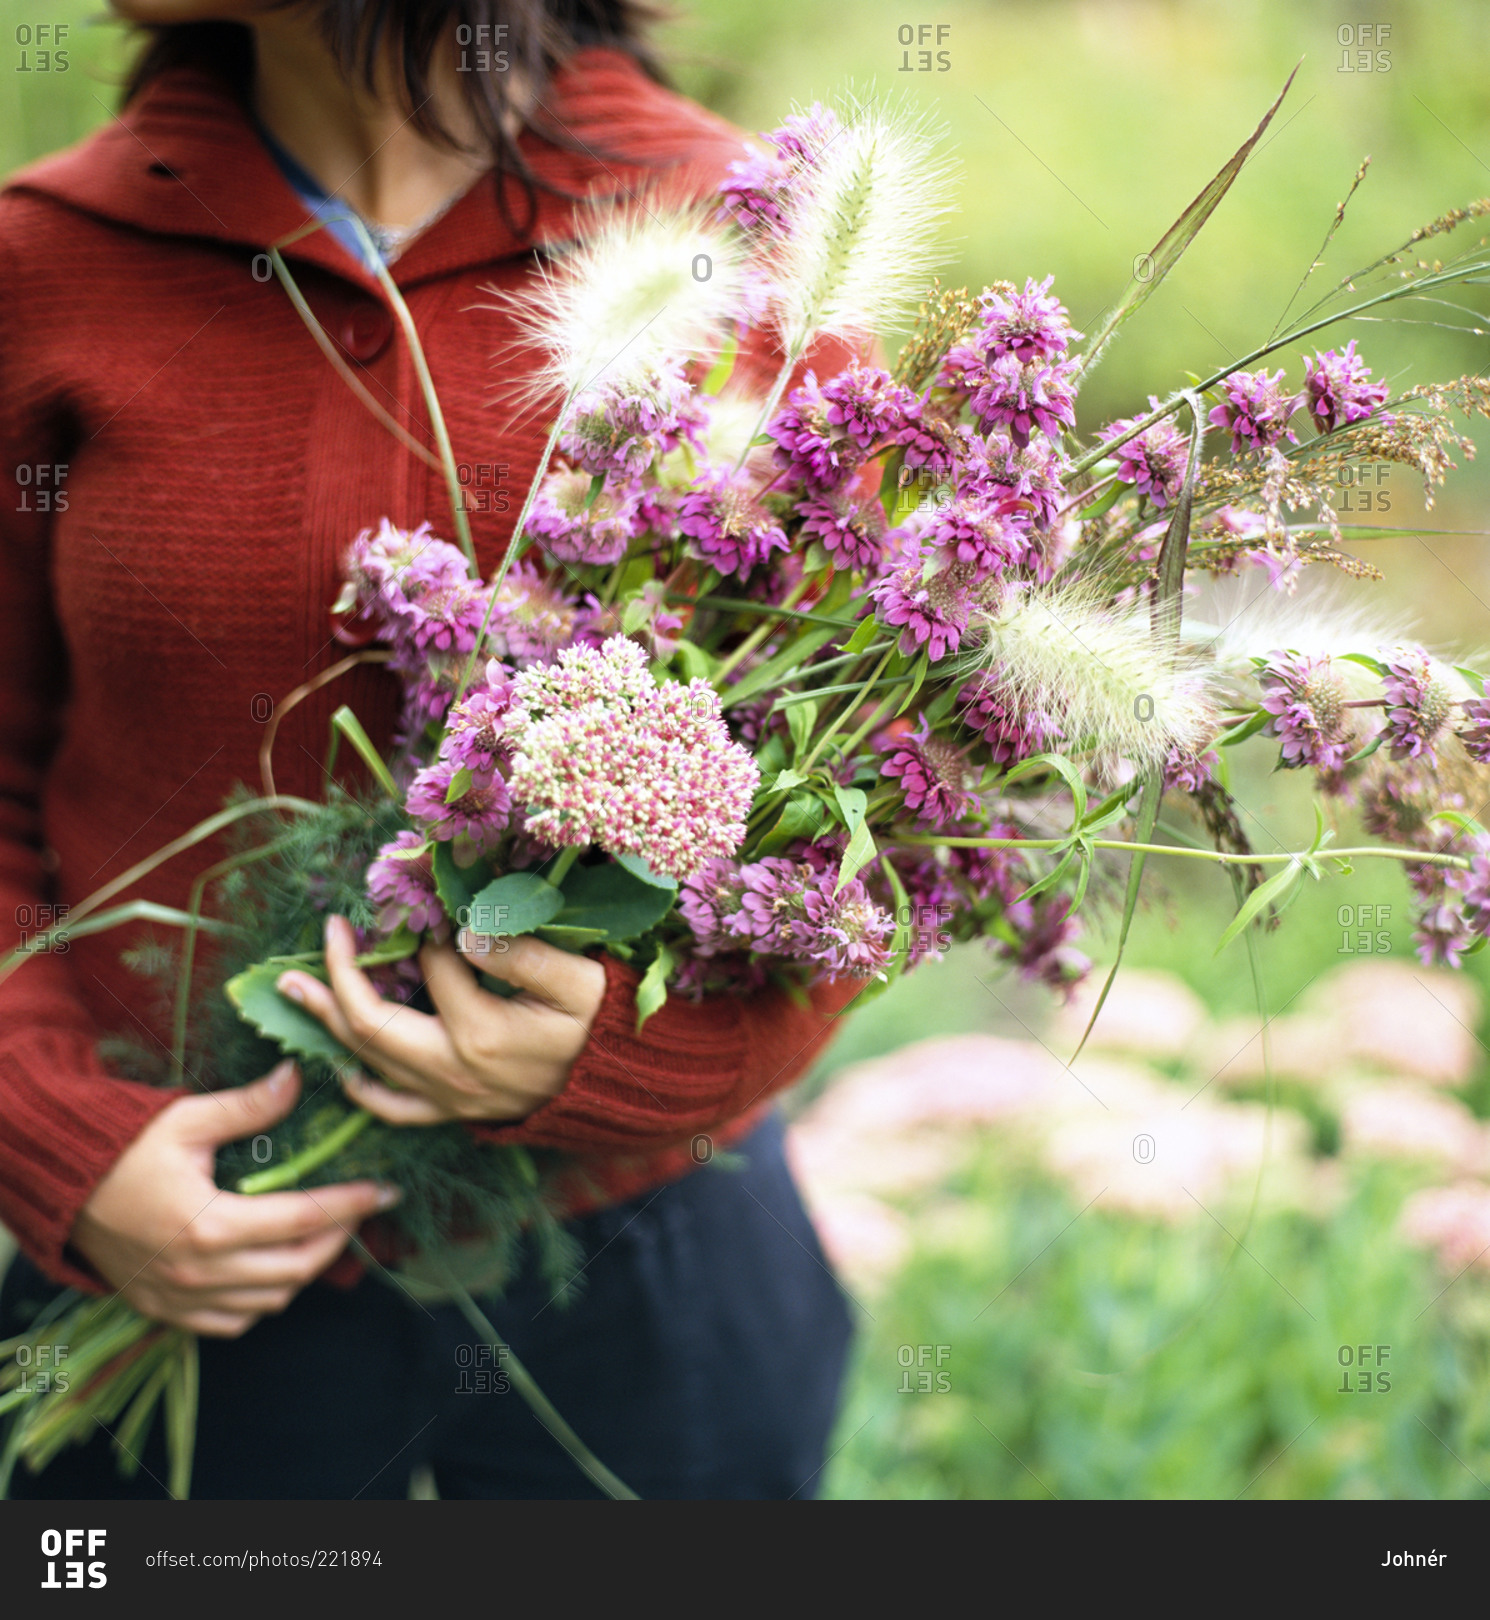 A woman holds a bouquet of purple flowers